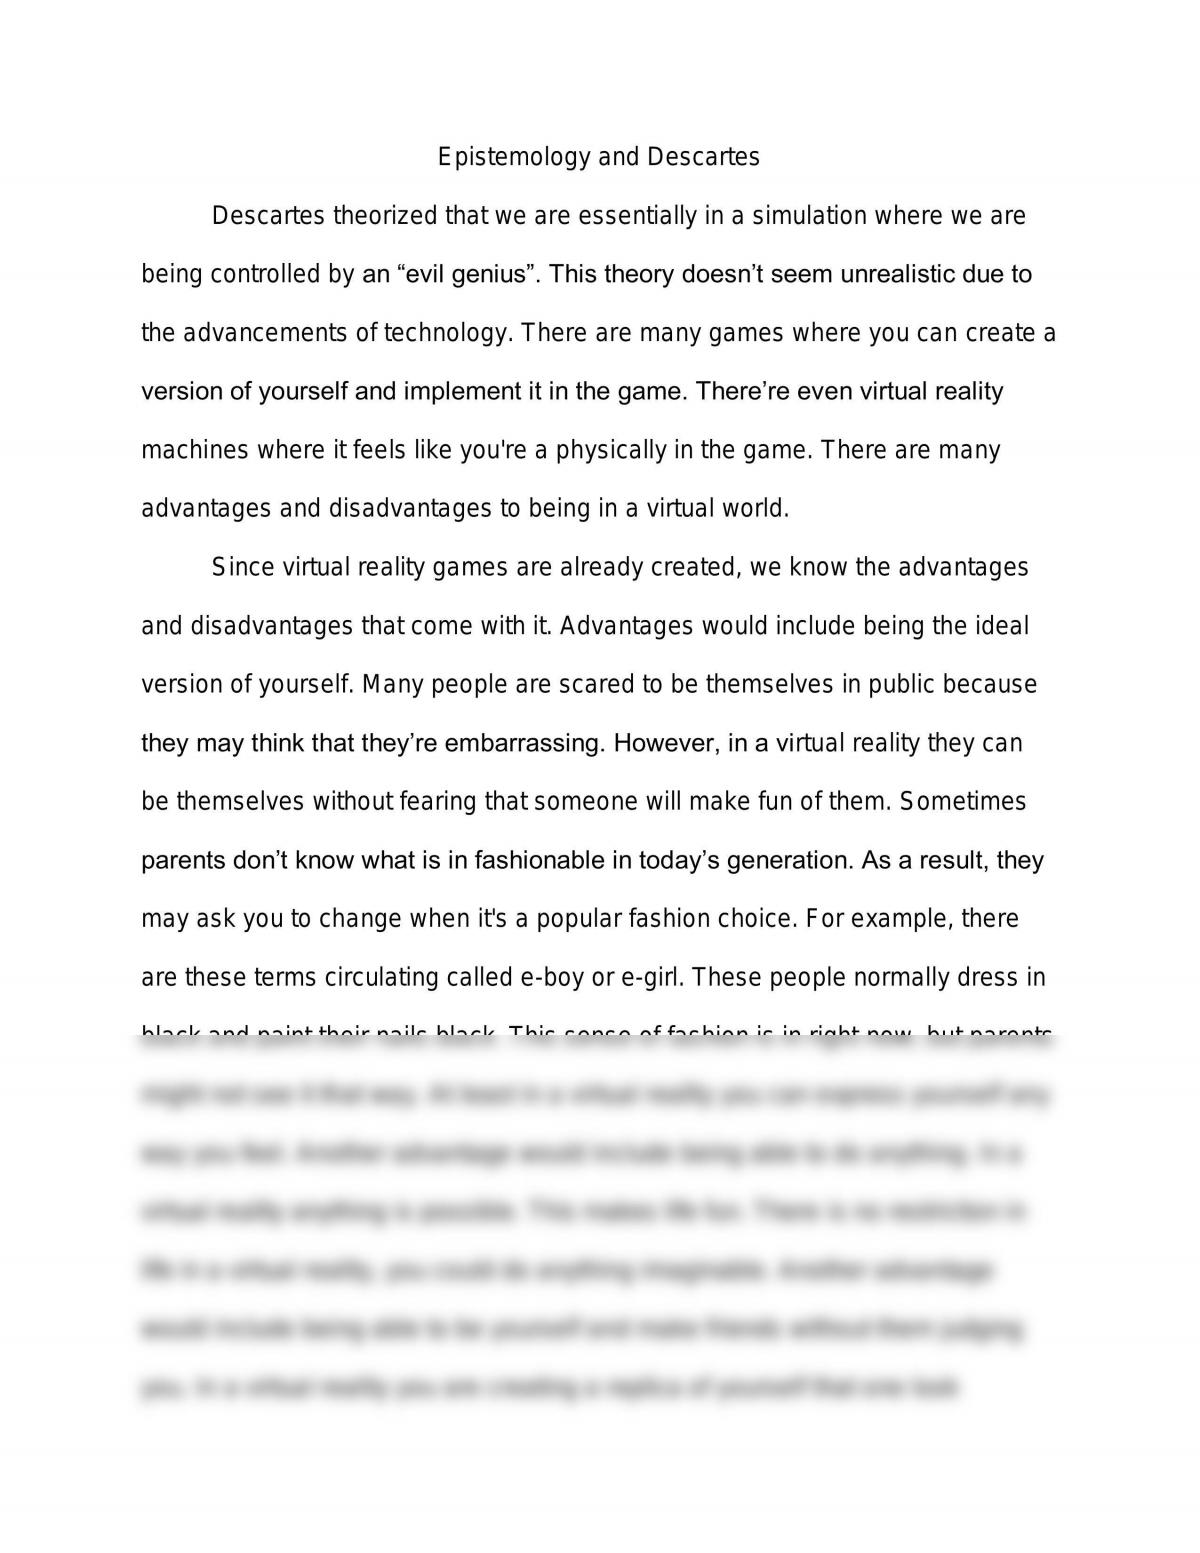 Philosophy research paper on Descartes - Page 1